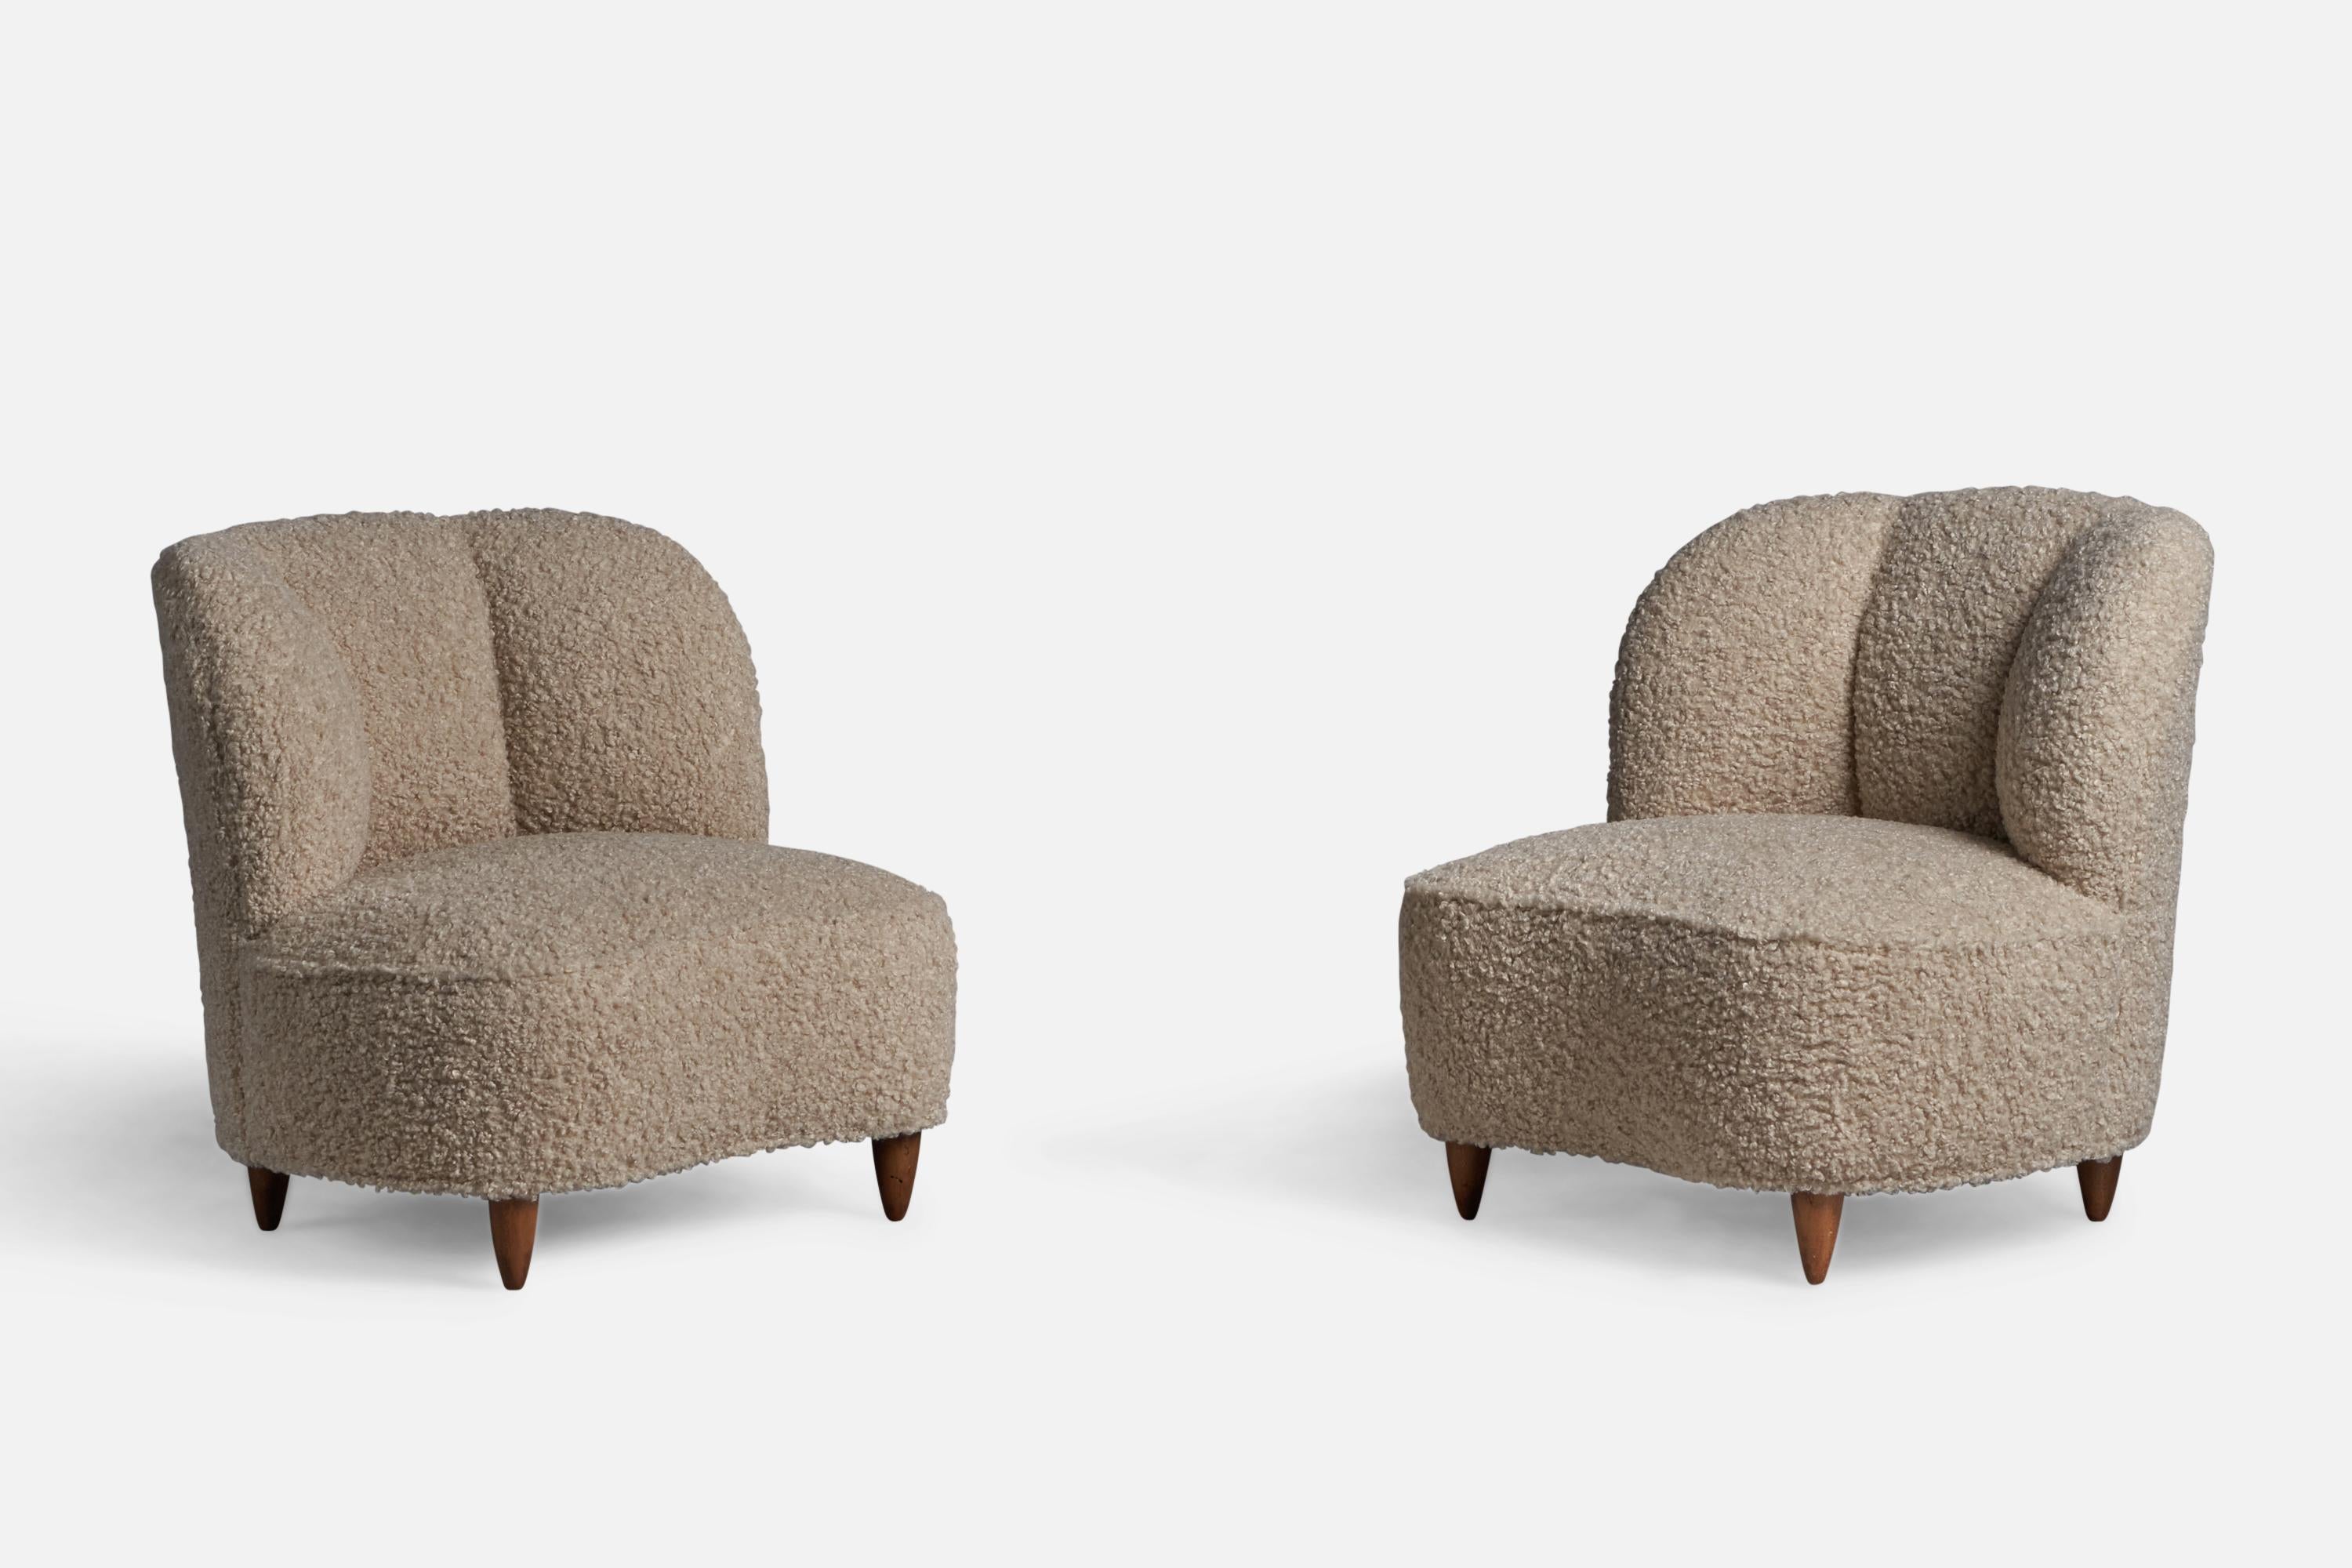 A pair of small beige bouclé fabric and walnut slipper chairs attributed to Gio Ponti, likely produced by Casa e Giardino, Italy, 1940s.

13.5” seat height